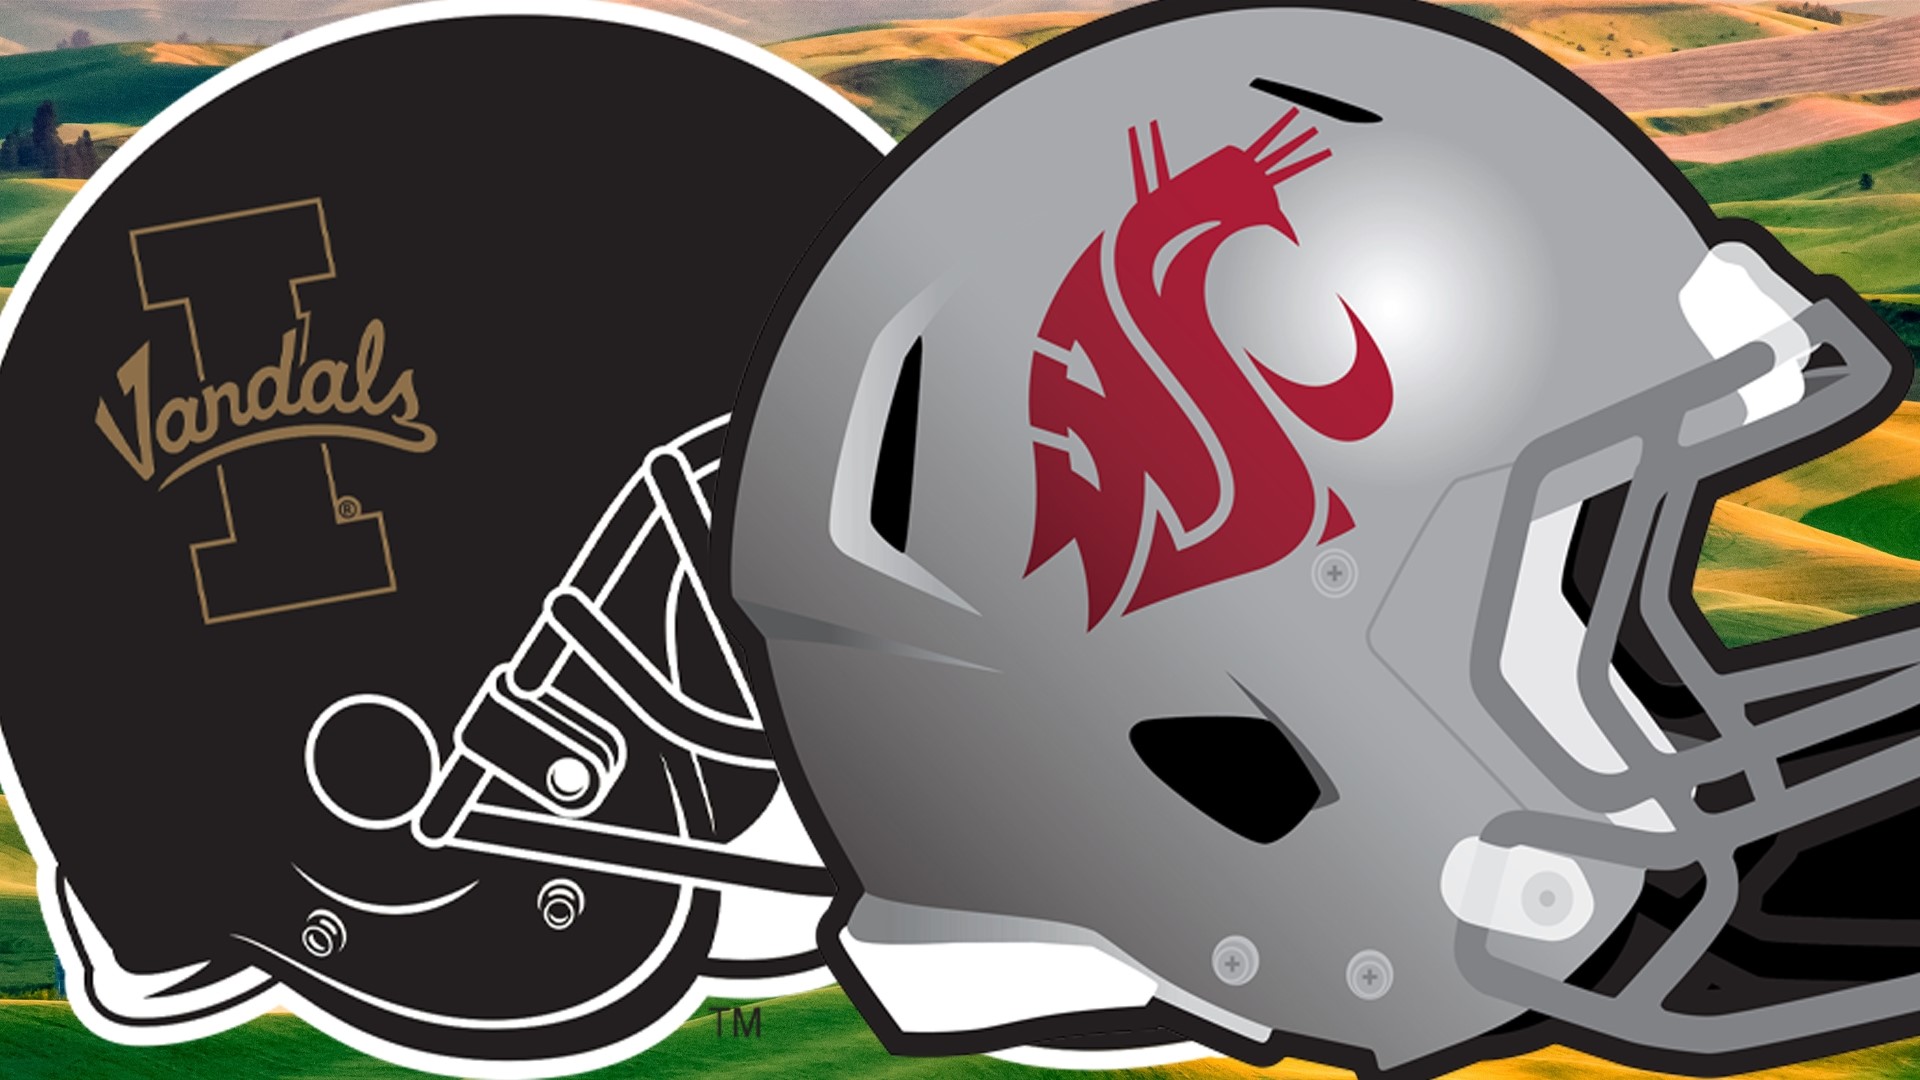 Washington State University and the University of Idaho football teams face off in the 'Battle of the Palouse.' History & interviews with Jake Dickert and Jason Eck.